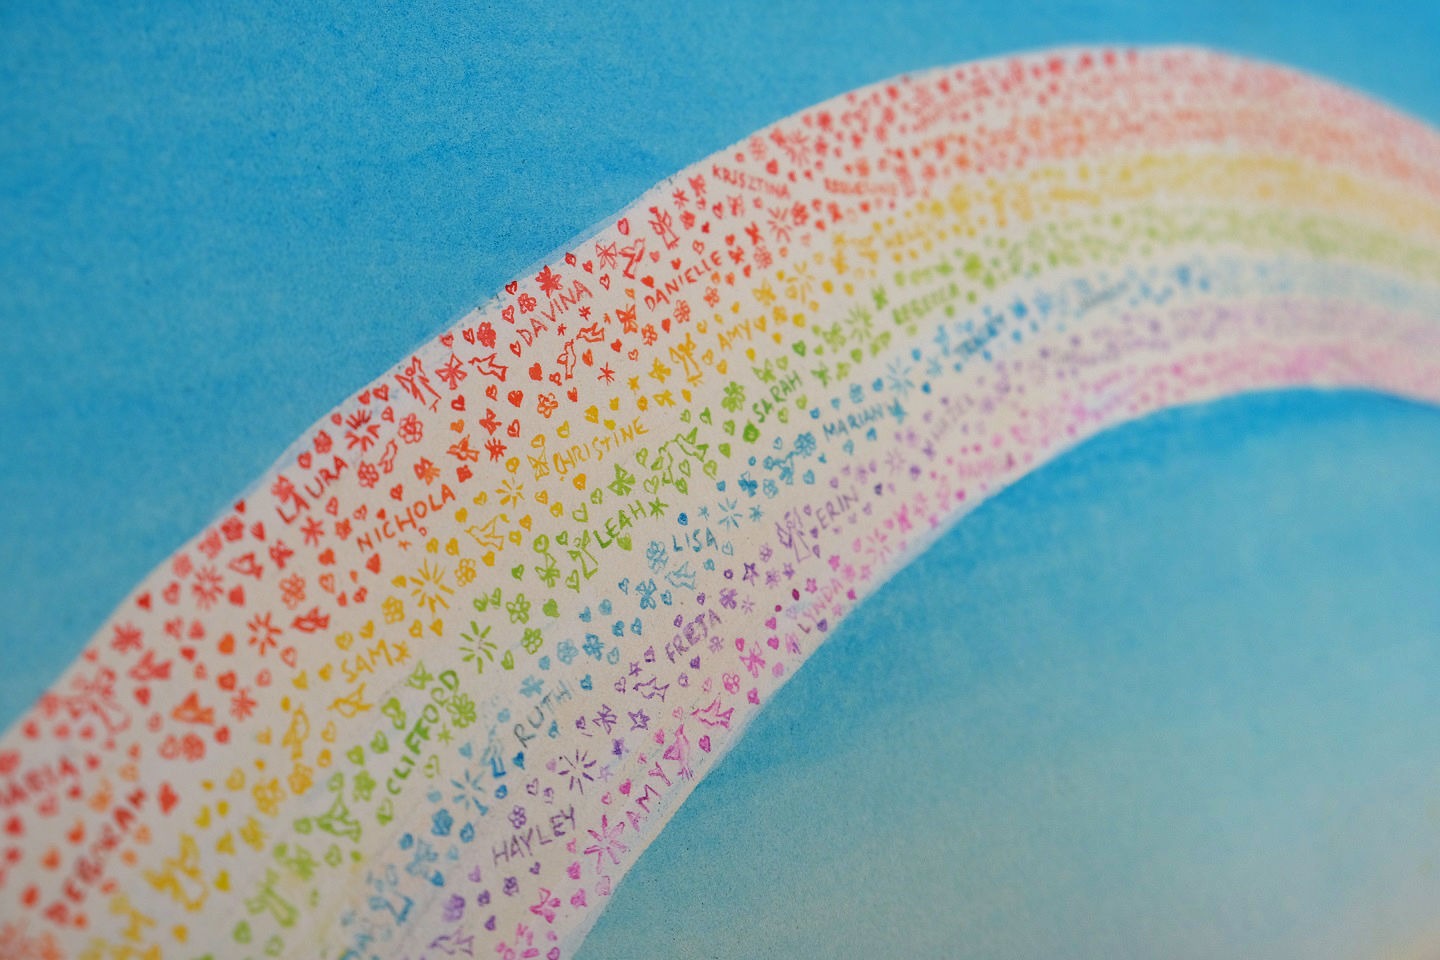 A close up of carers’ names in the ‘Rainbow of Hope’ painting